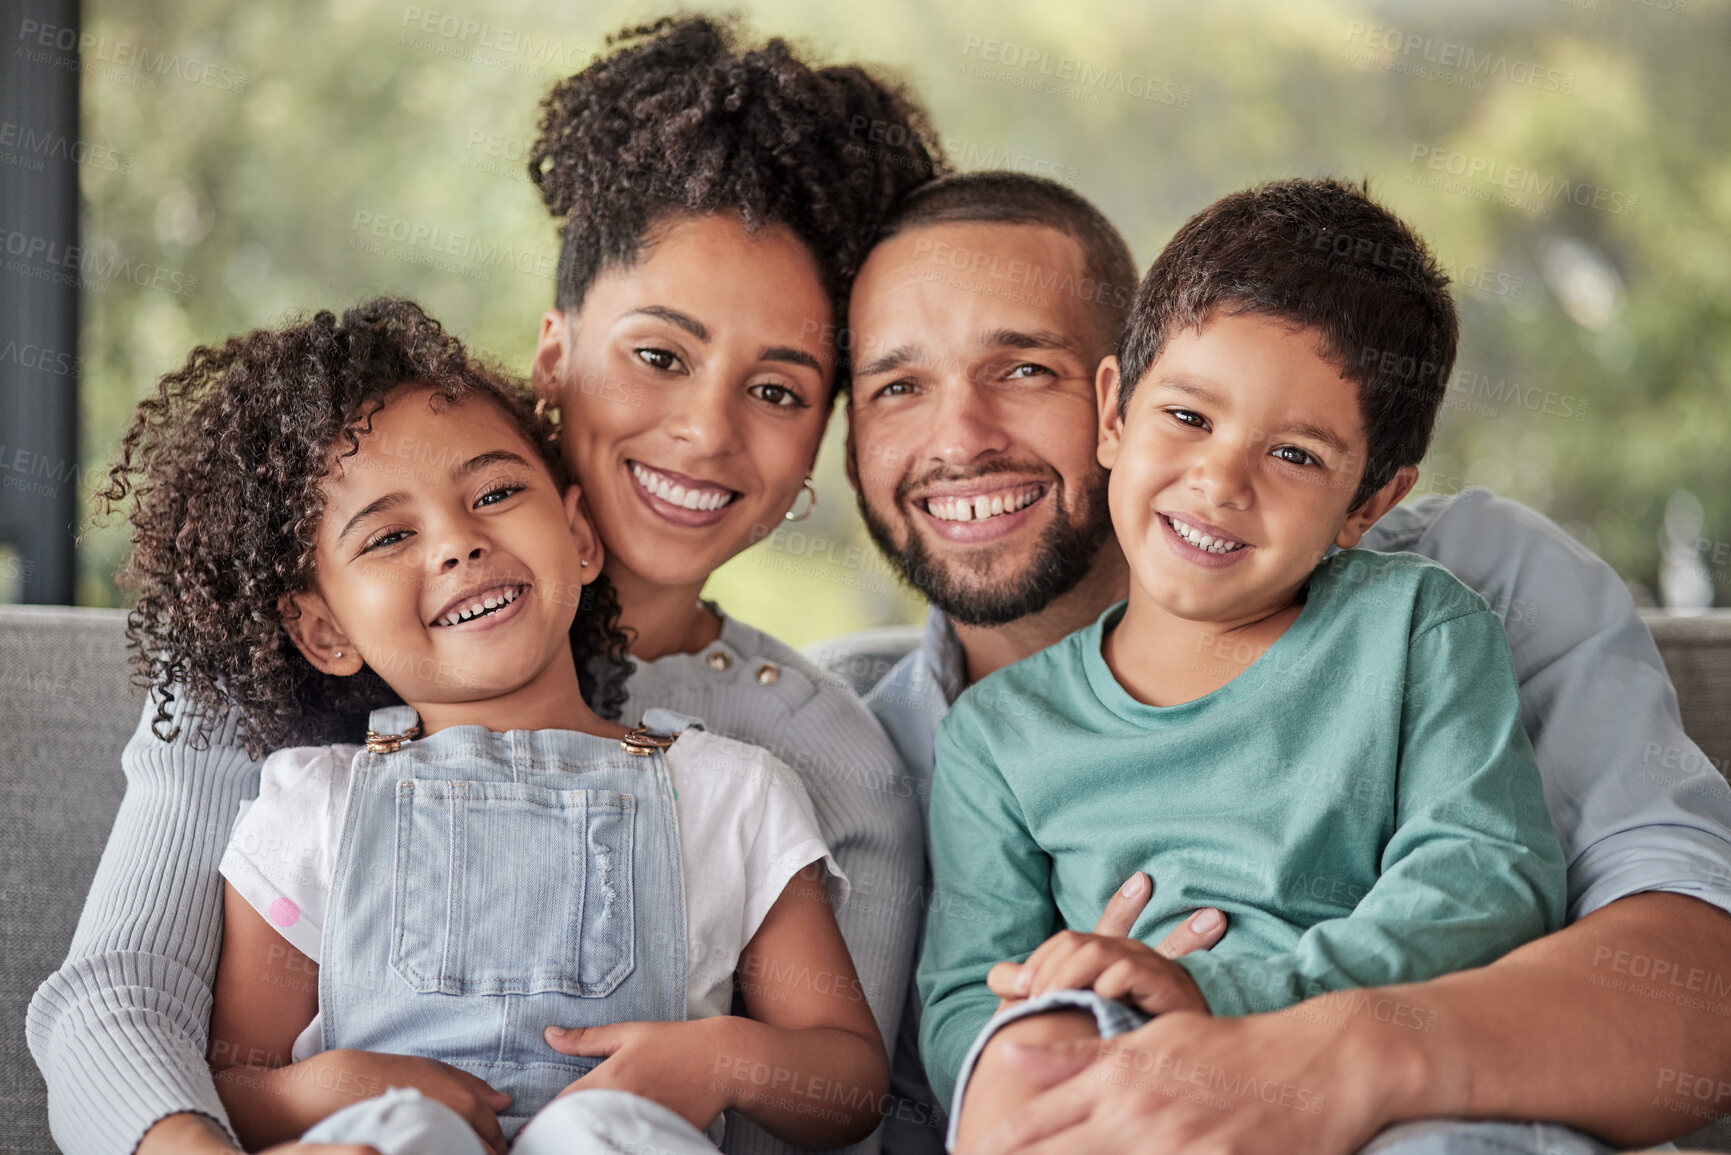 Buy stock photo Smile, portrait and happy family love to relax together in a positive home on a fun weekend for bonding. Happiness, mother and father smiling with young Latino kids or children enjoying quality time 